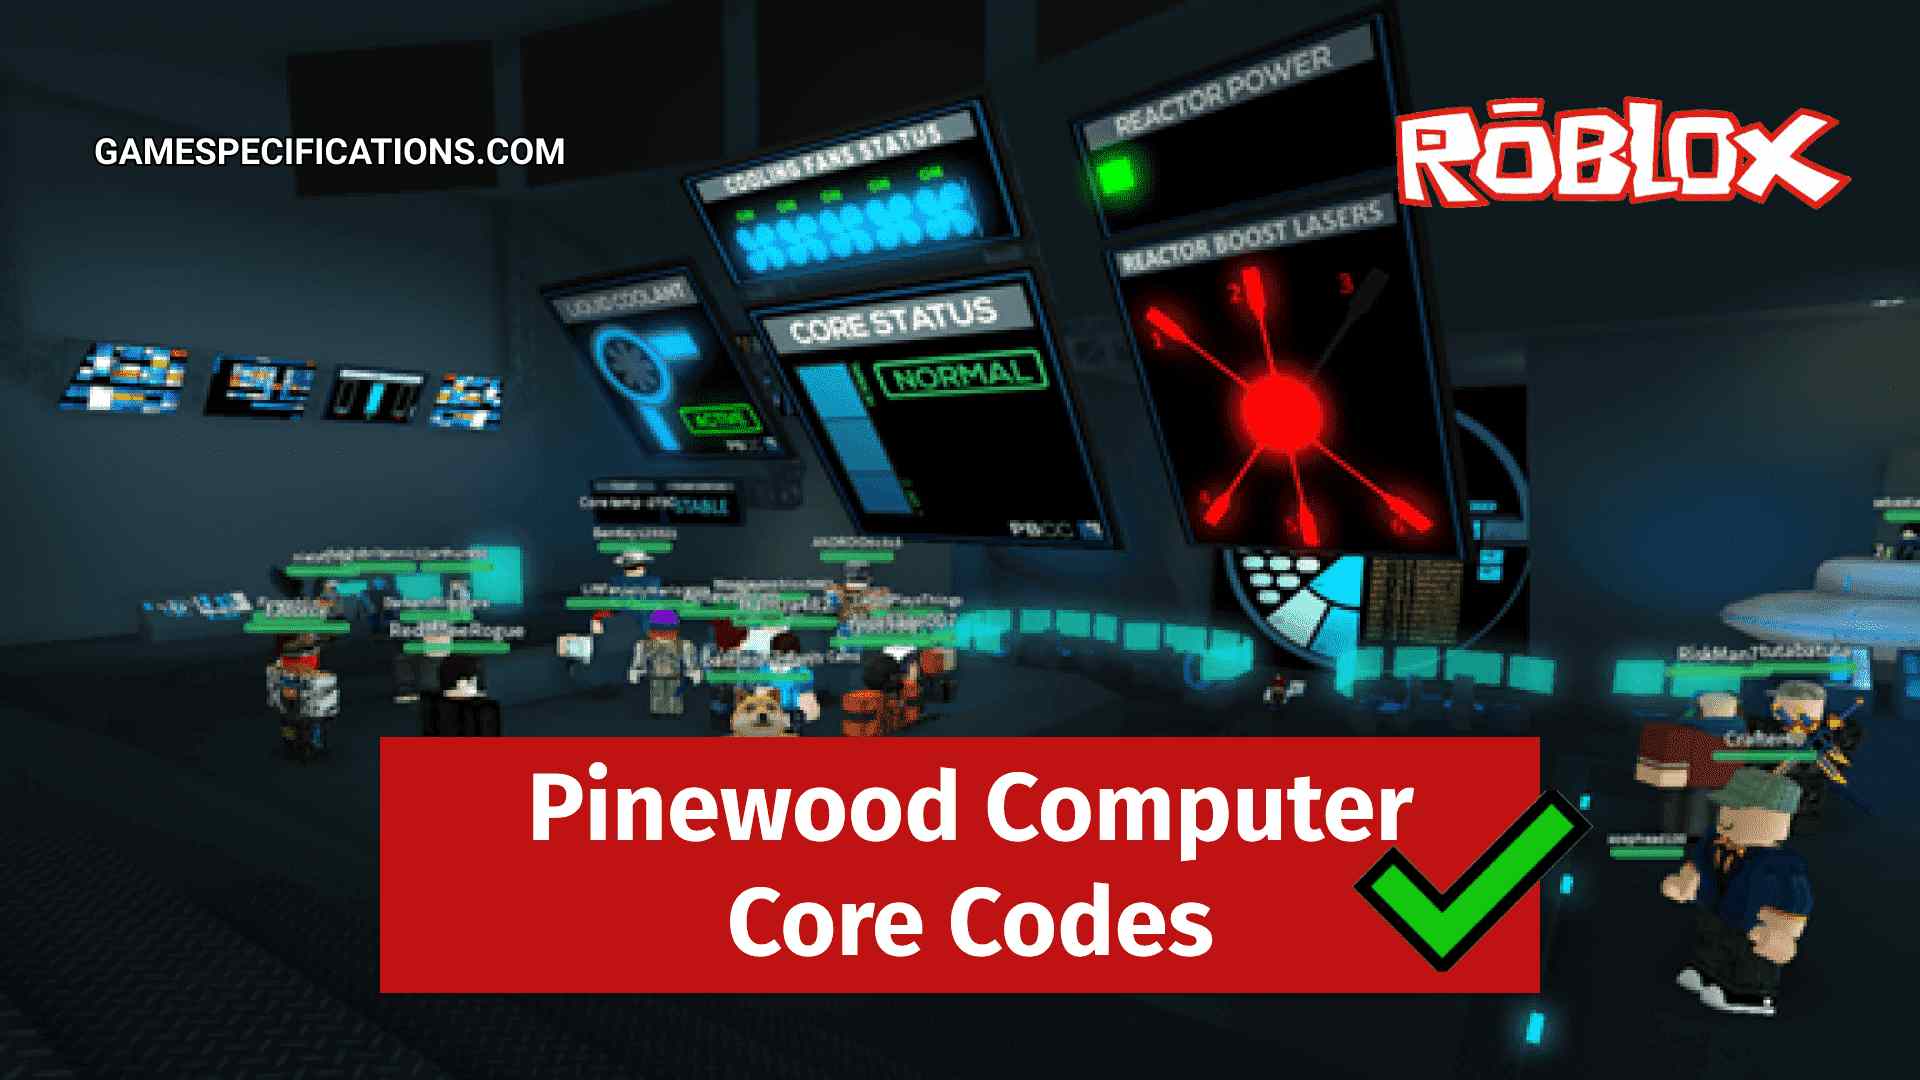 Roblox Pinewood Computer Core Codes July 2021 Game Specifications - roblox globex computer core uncopylocked